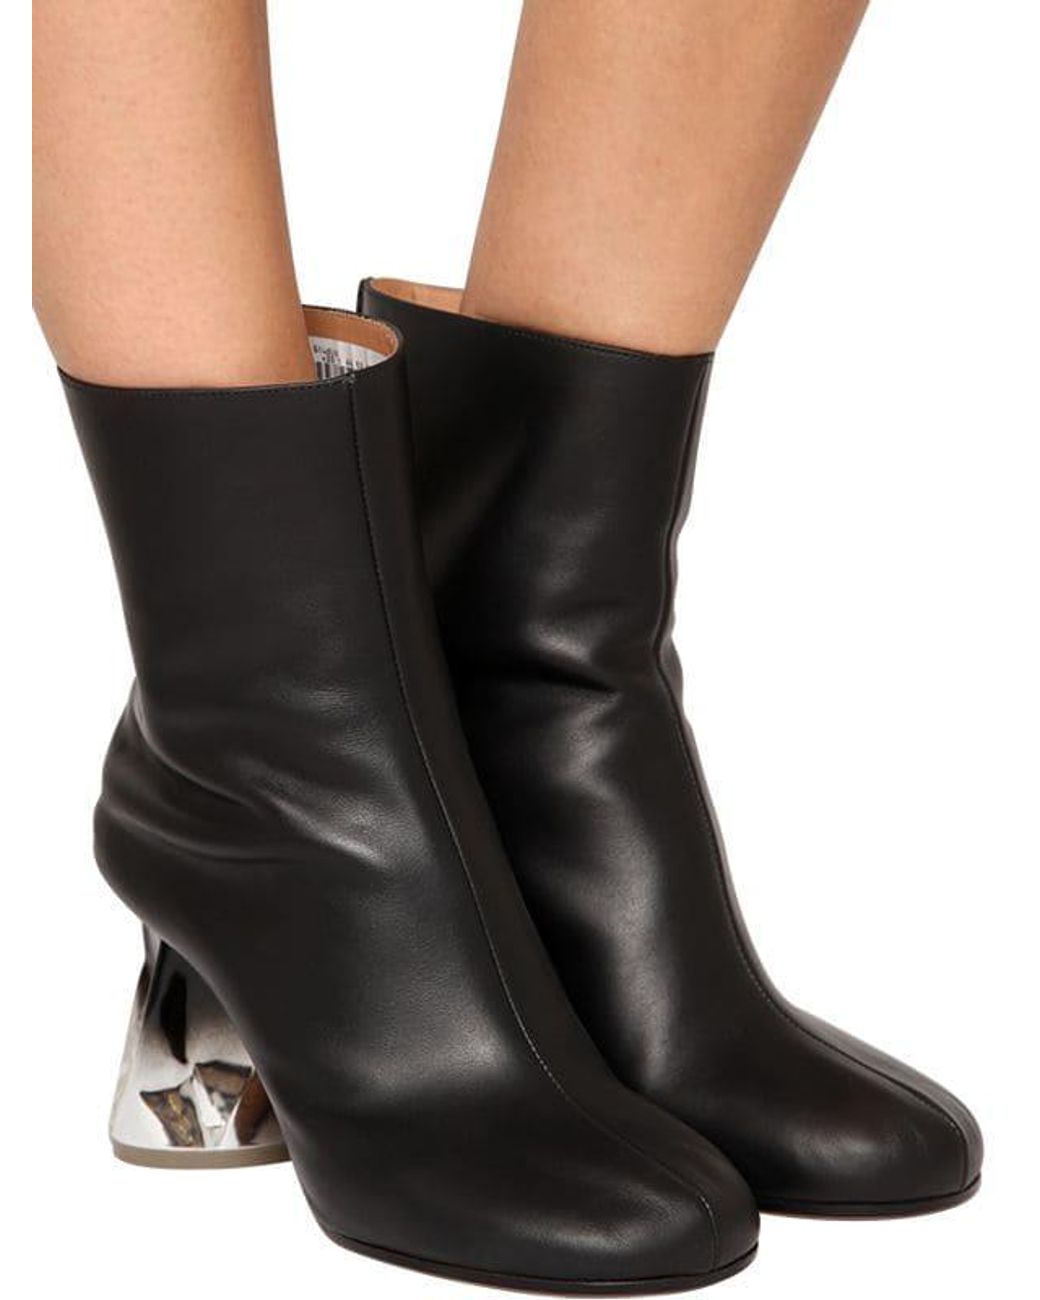 Maison Margiela Crushed Heel Leather Boots in Black | Lyst